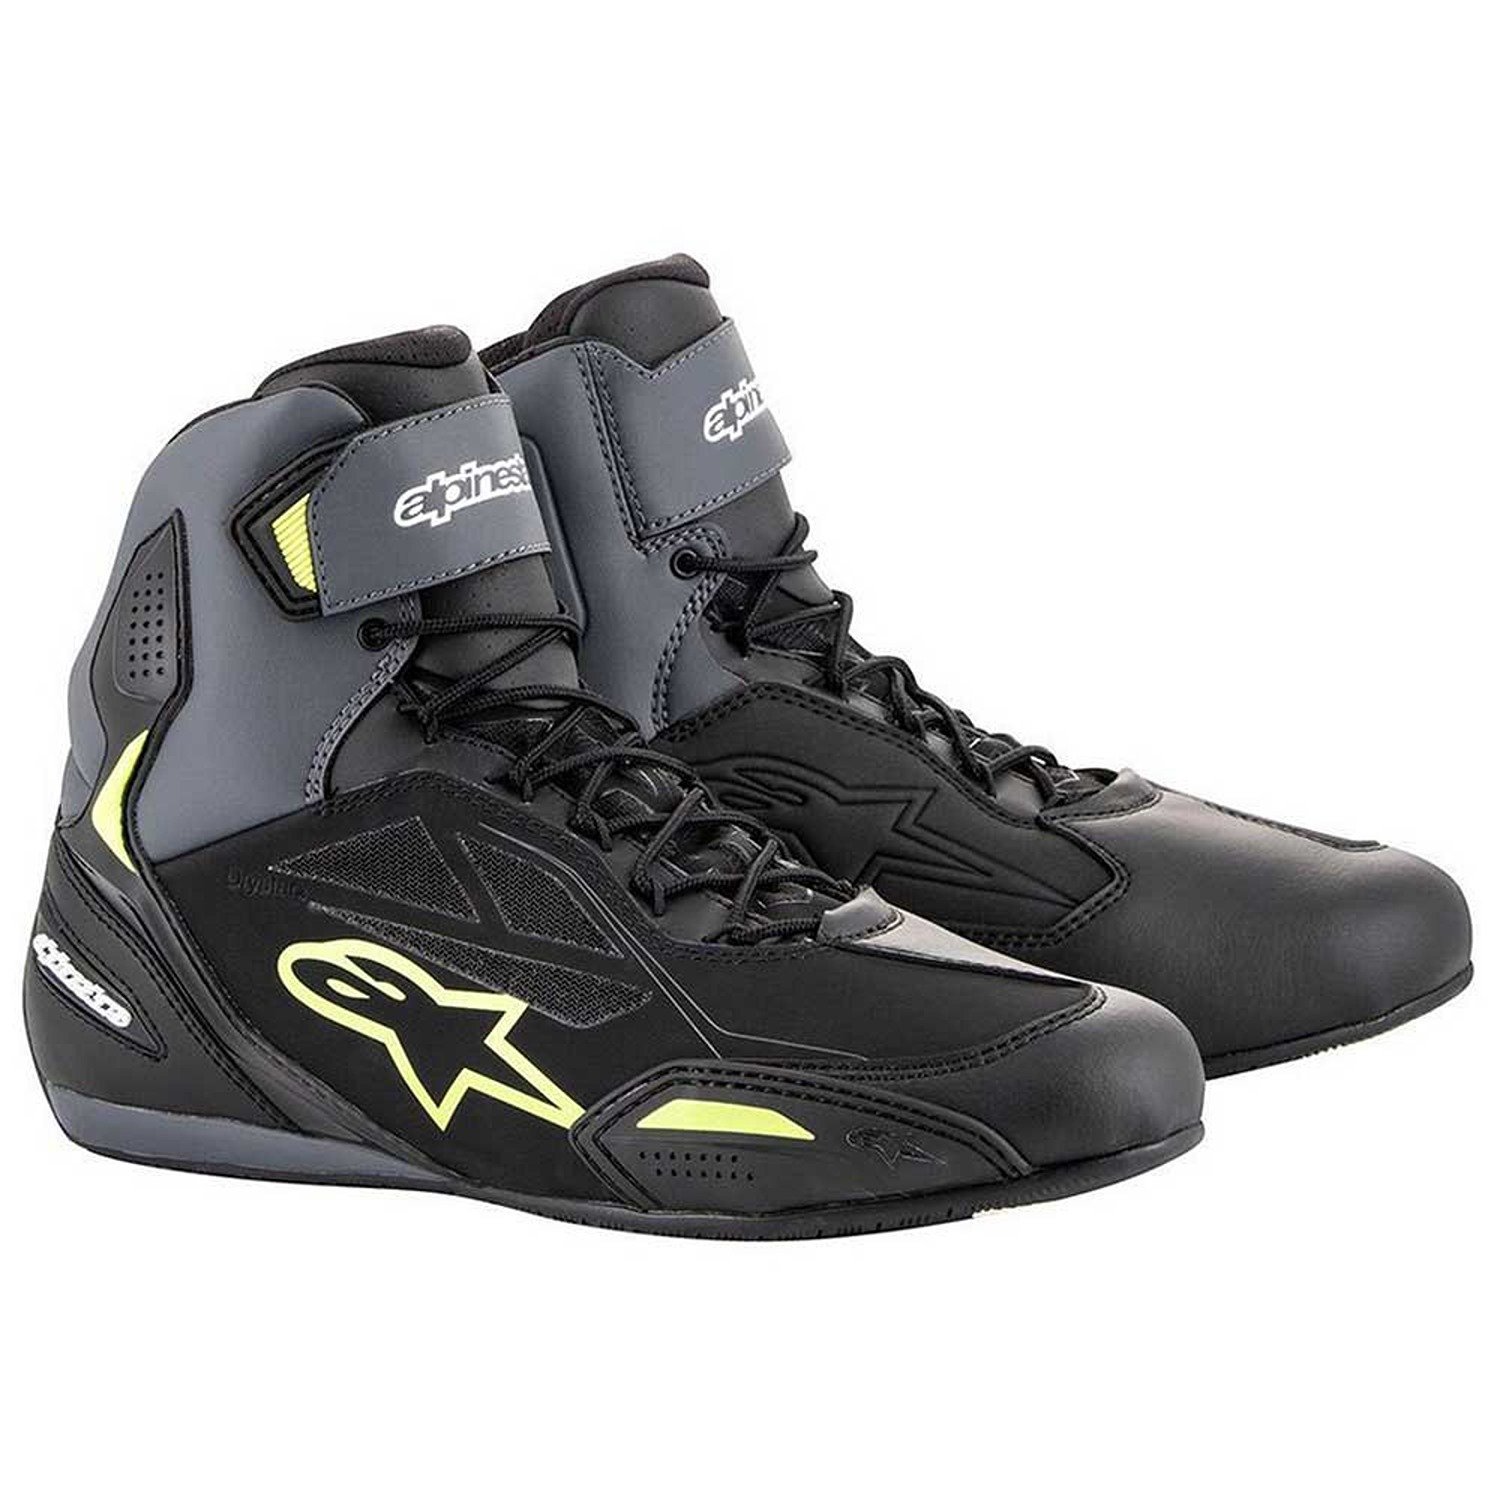 Image of Alpinestars Faster-3 Shoes Black Yellow Fluo Größe US 135